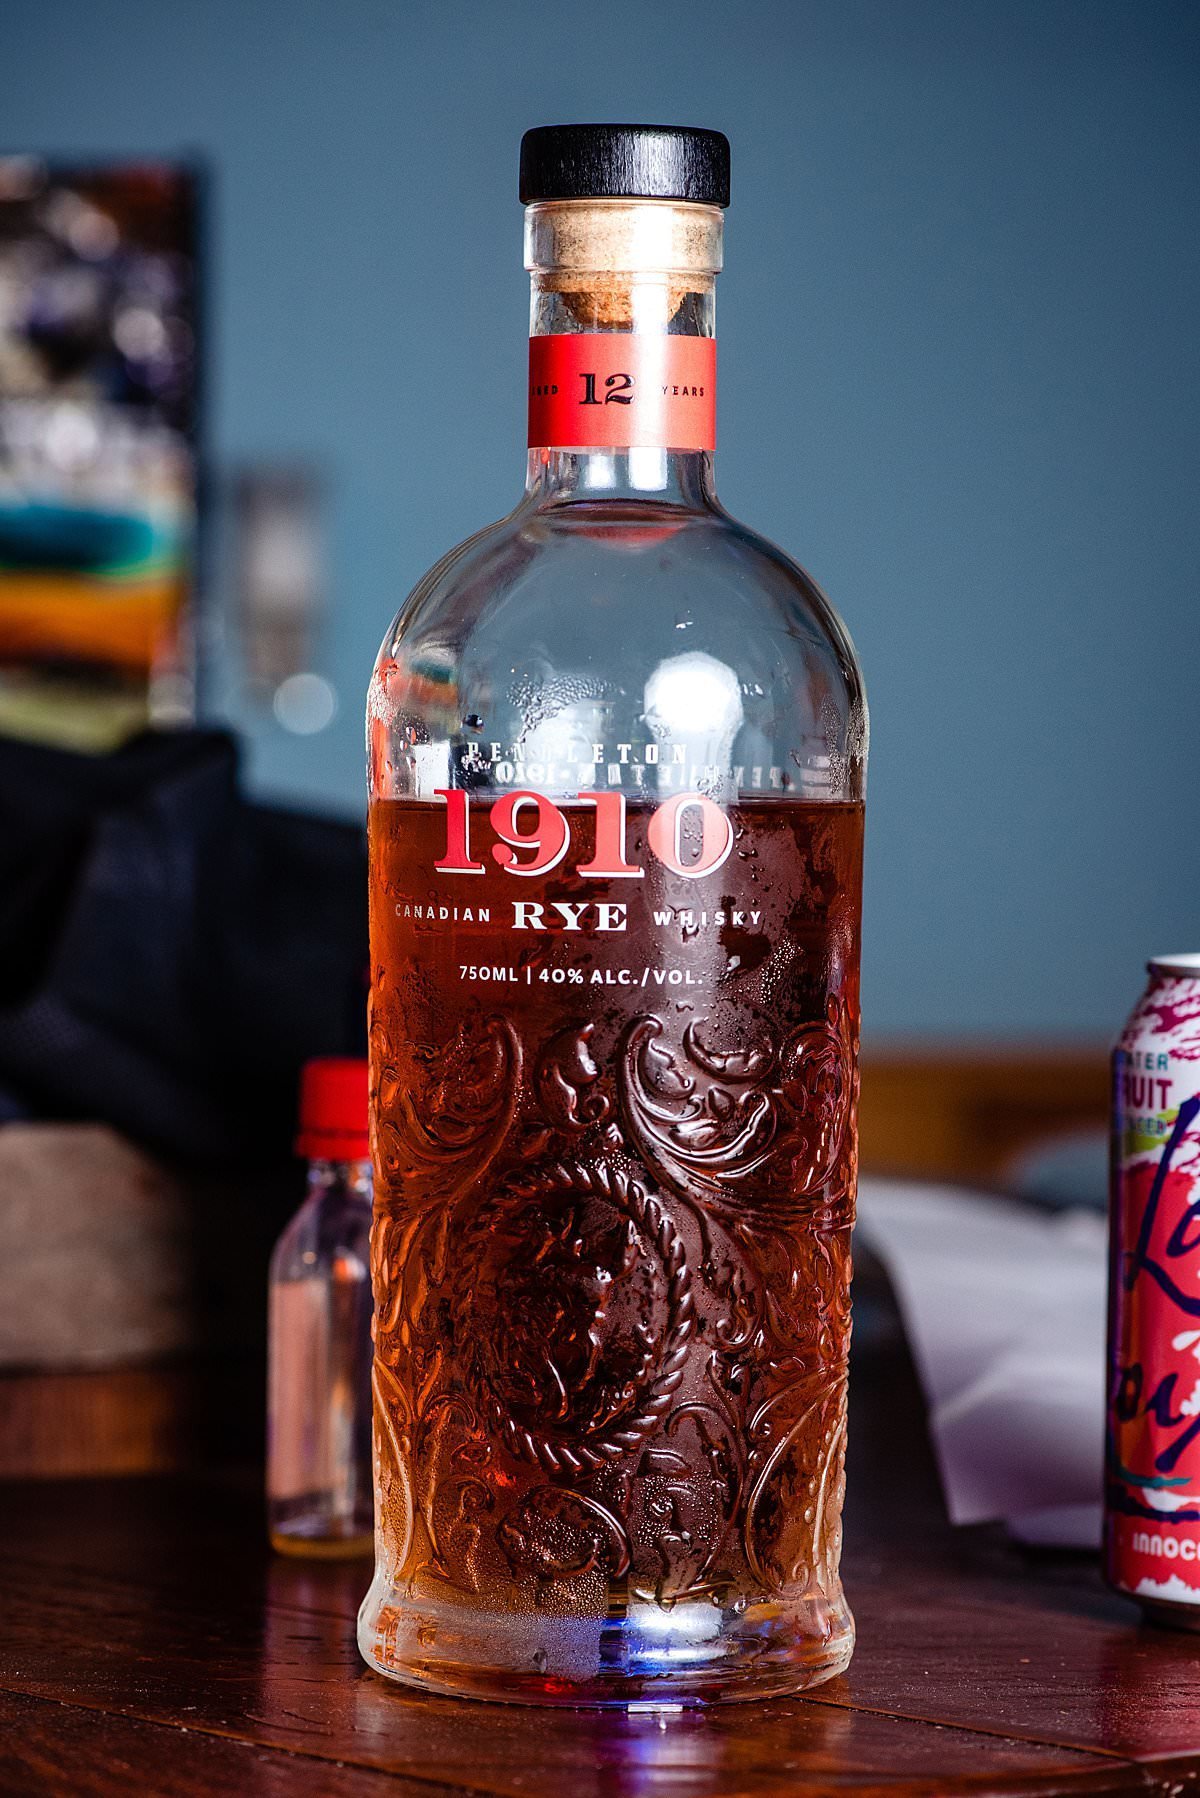 Close up photo of a bottle of 1910 Rye Whisky